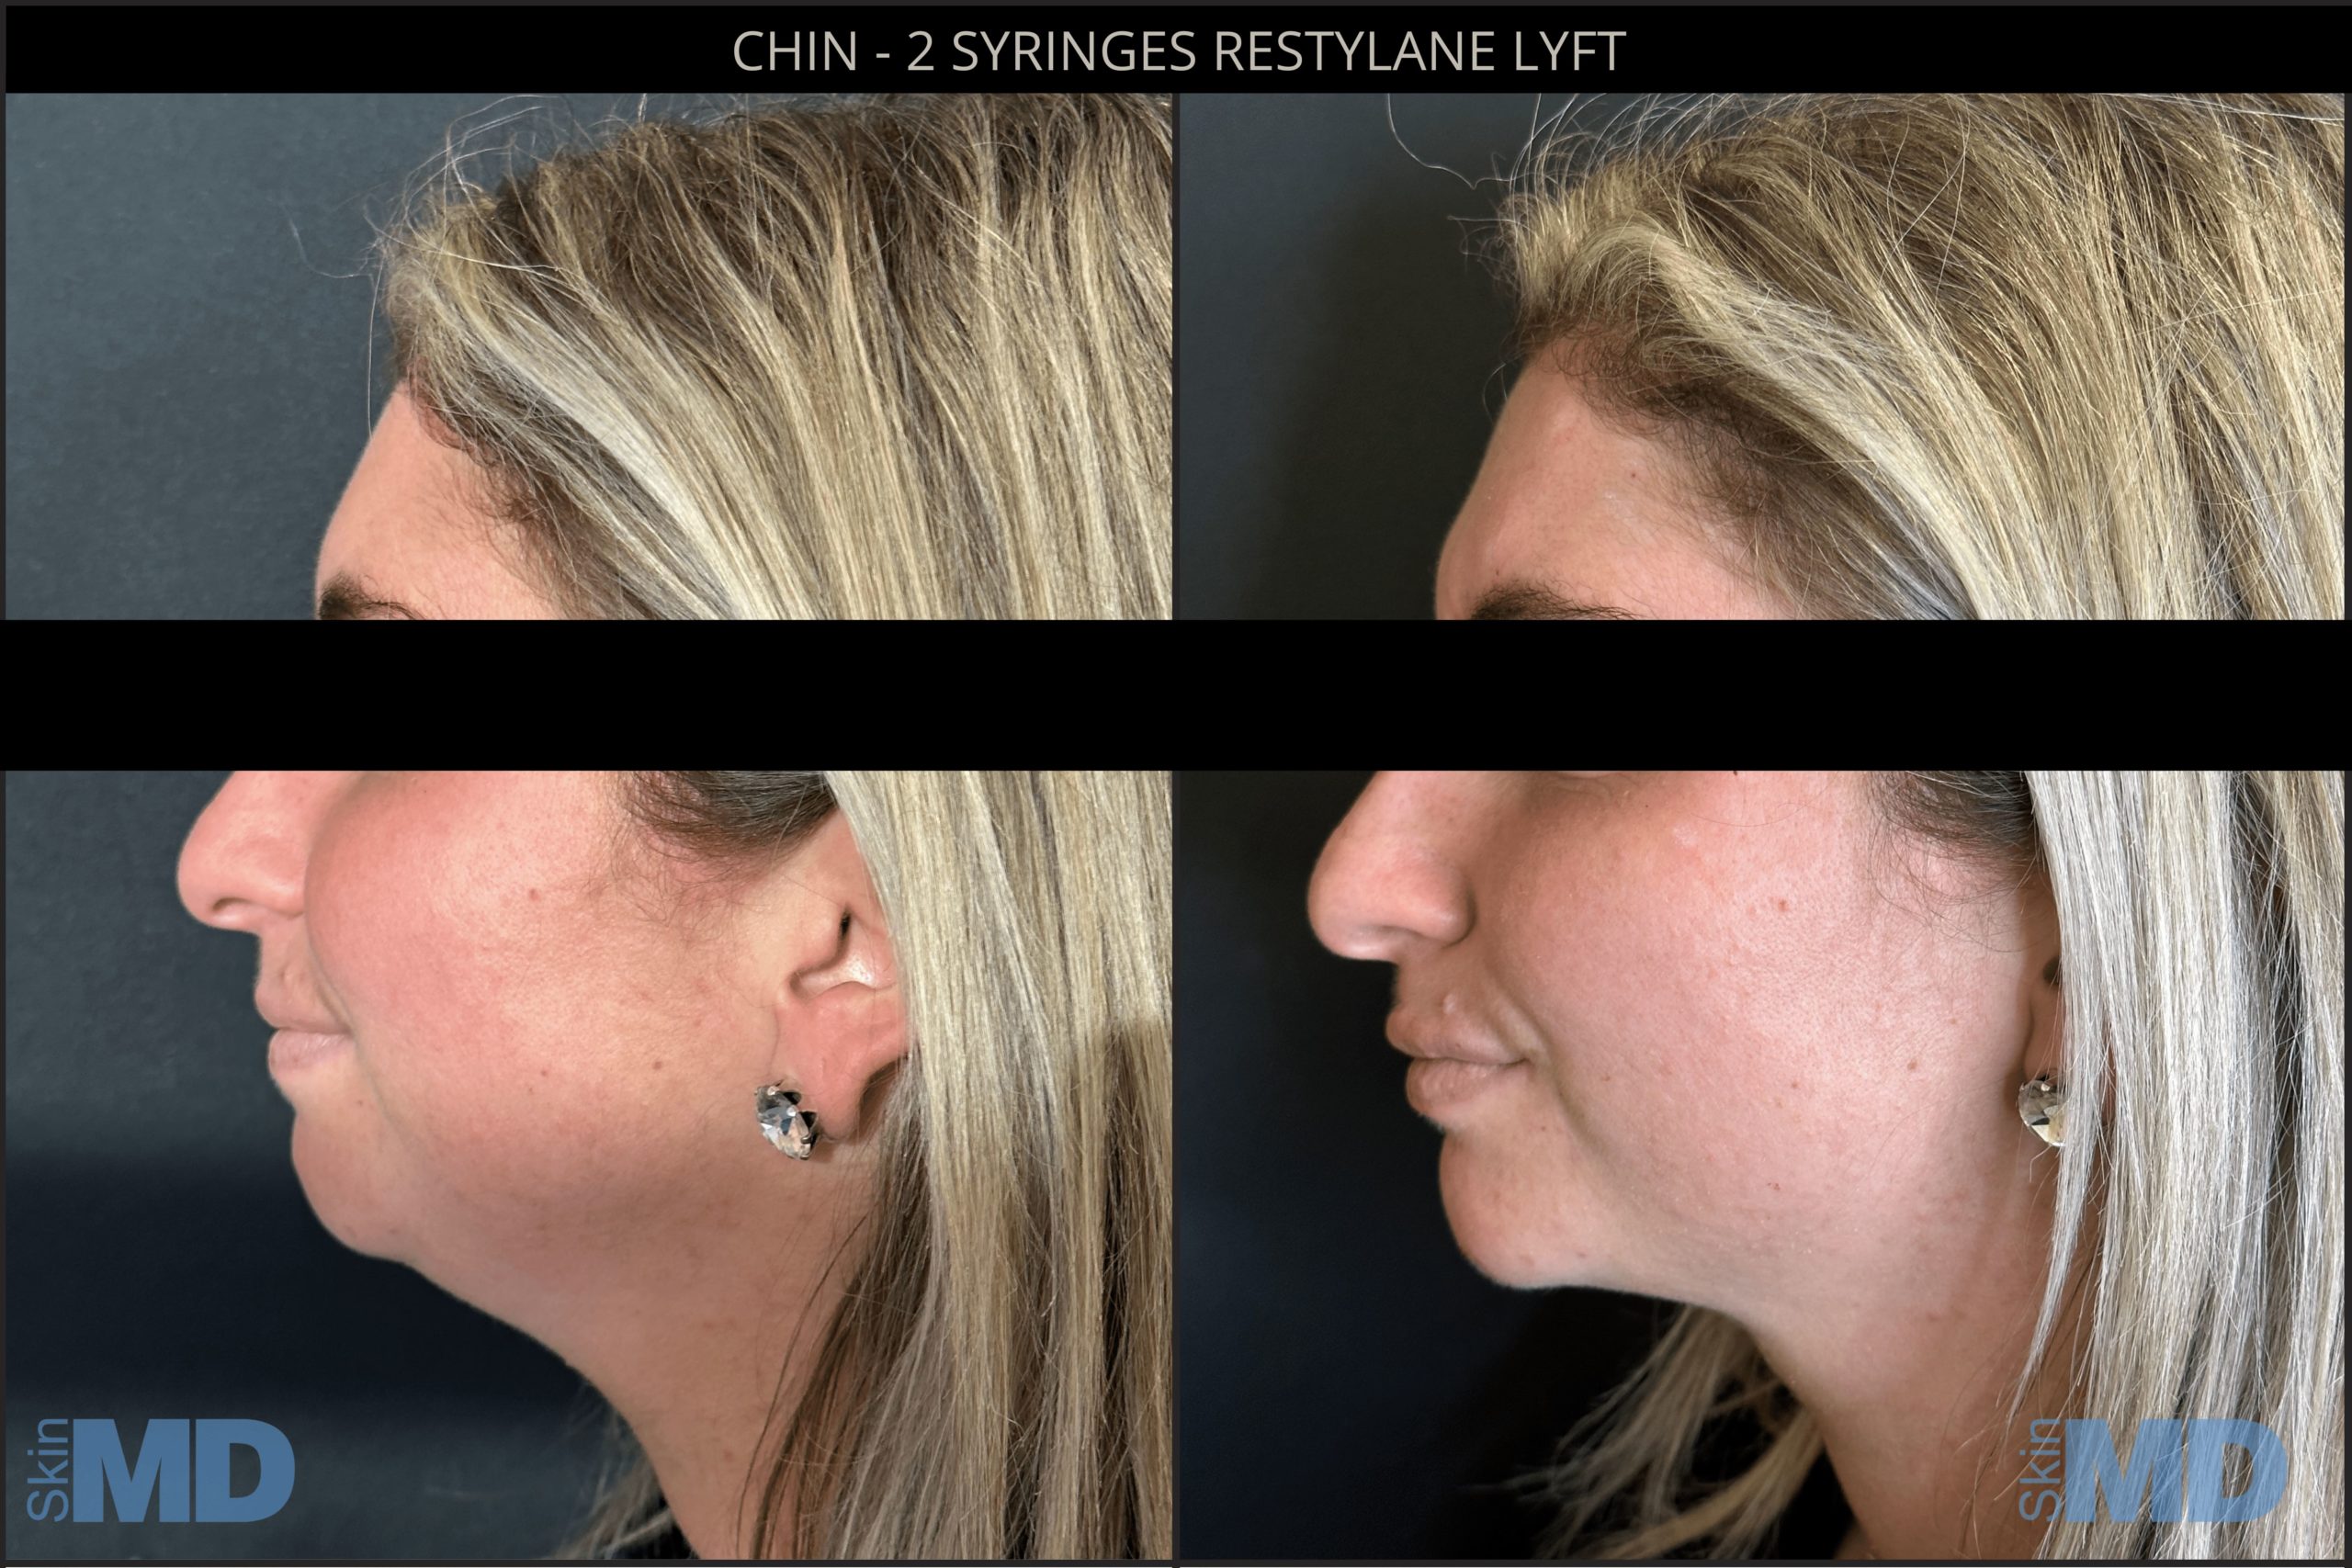 Before and after dermal fillers results